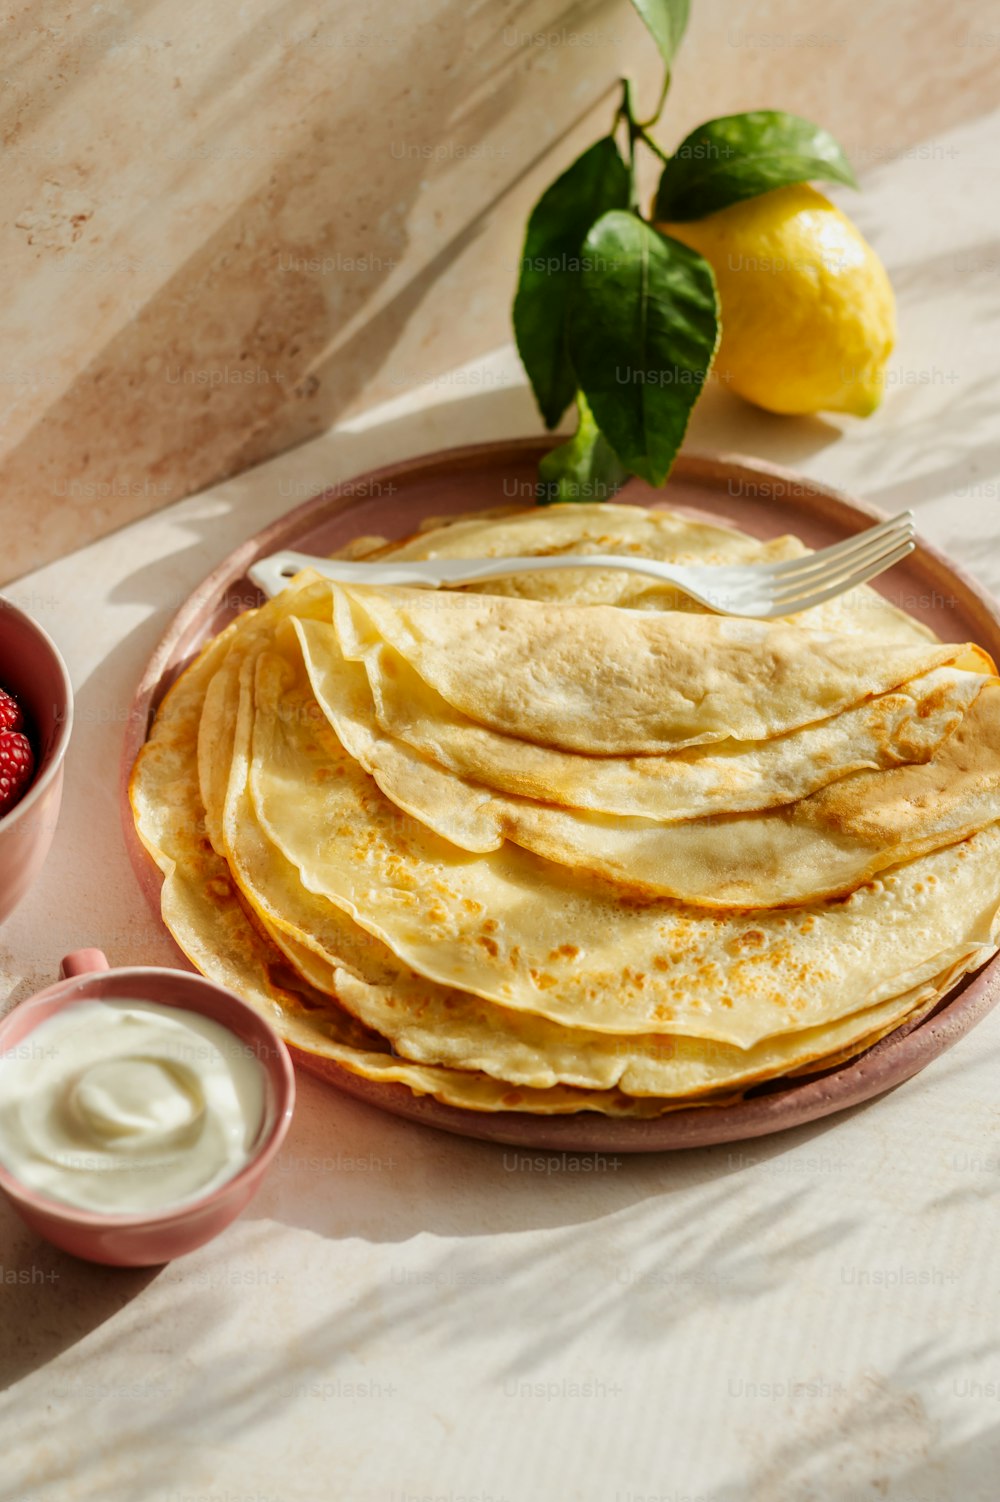 a plate of flatbreads and a bowl of yogurt